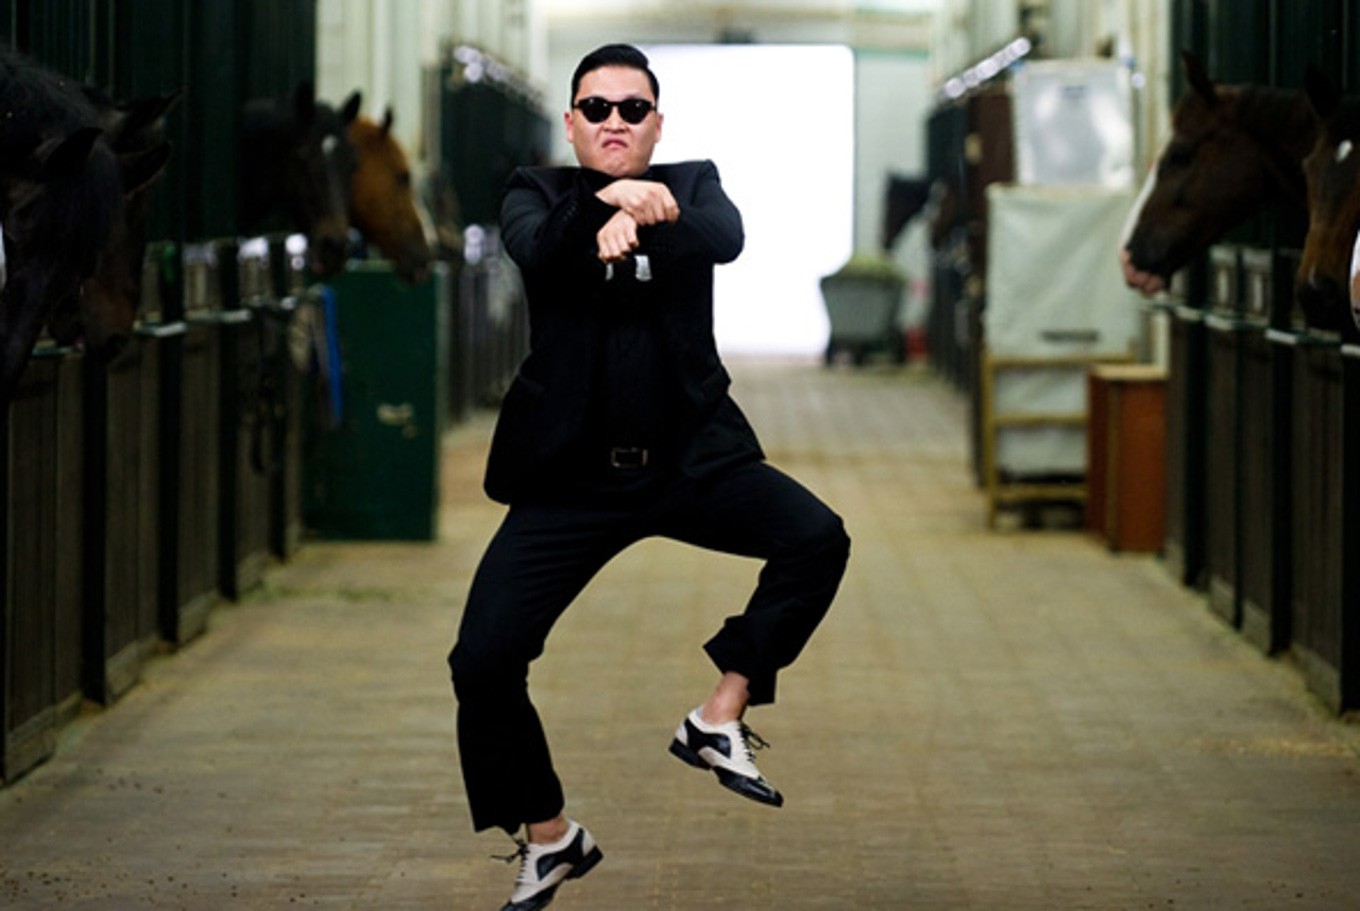 Most-viewed  music videos, from 'Gangnam Style' to 'Despacito